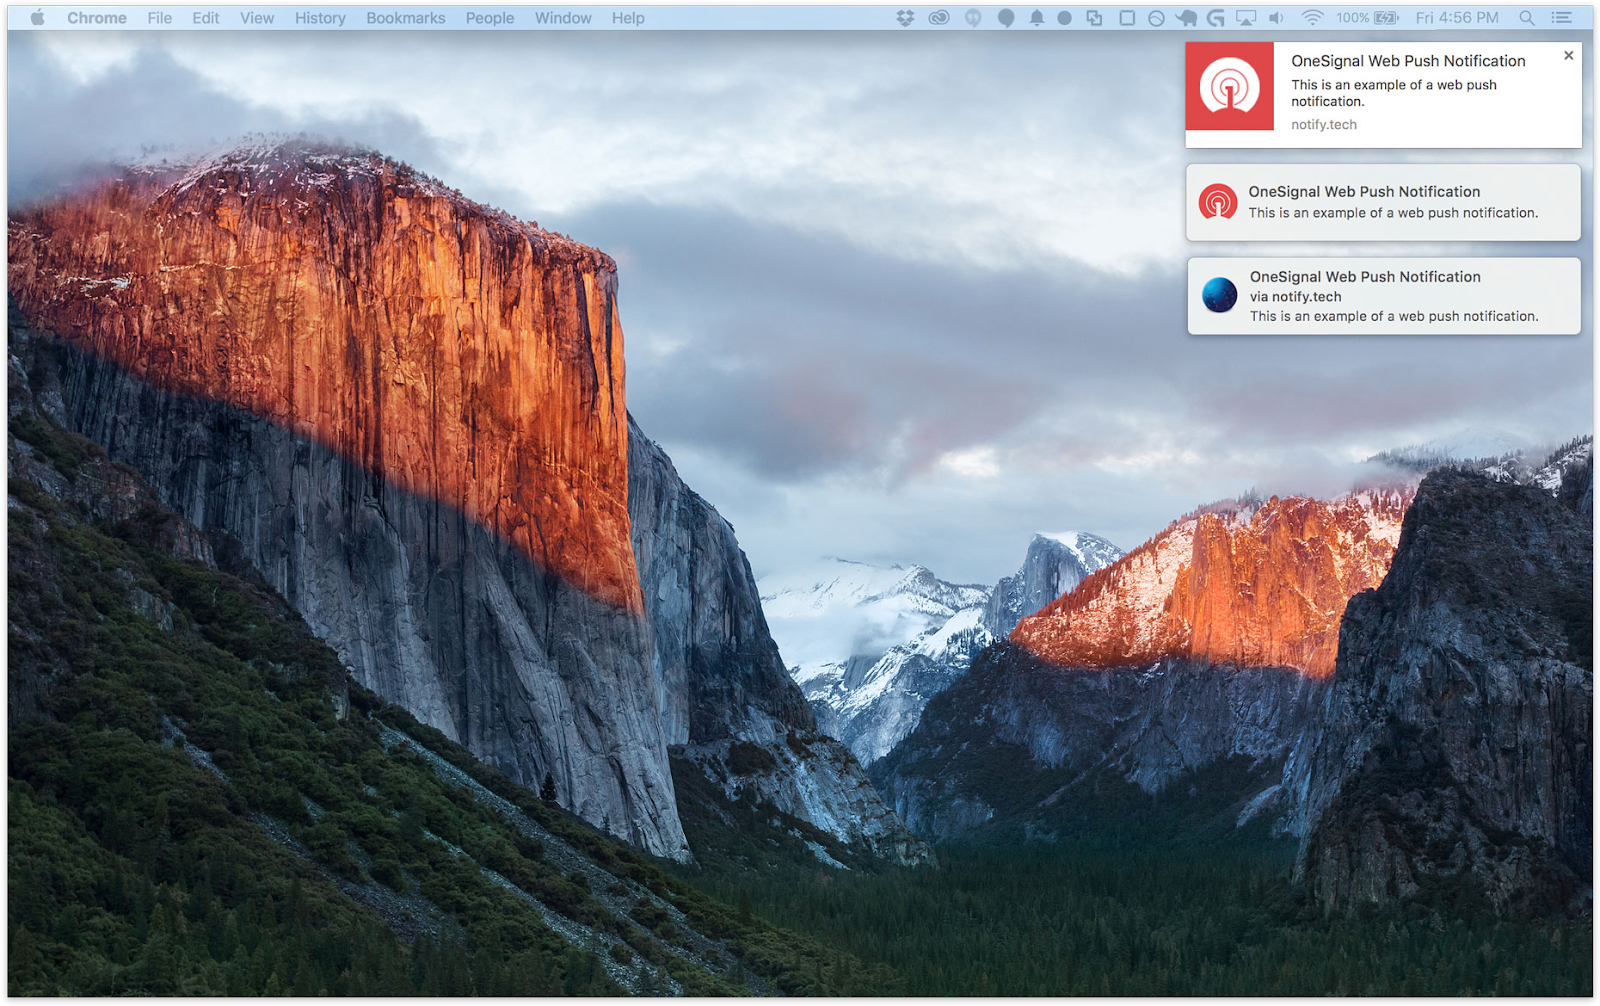 How a push notification sent from the web can appear on a desktop.